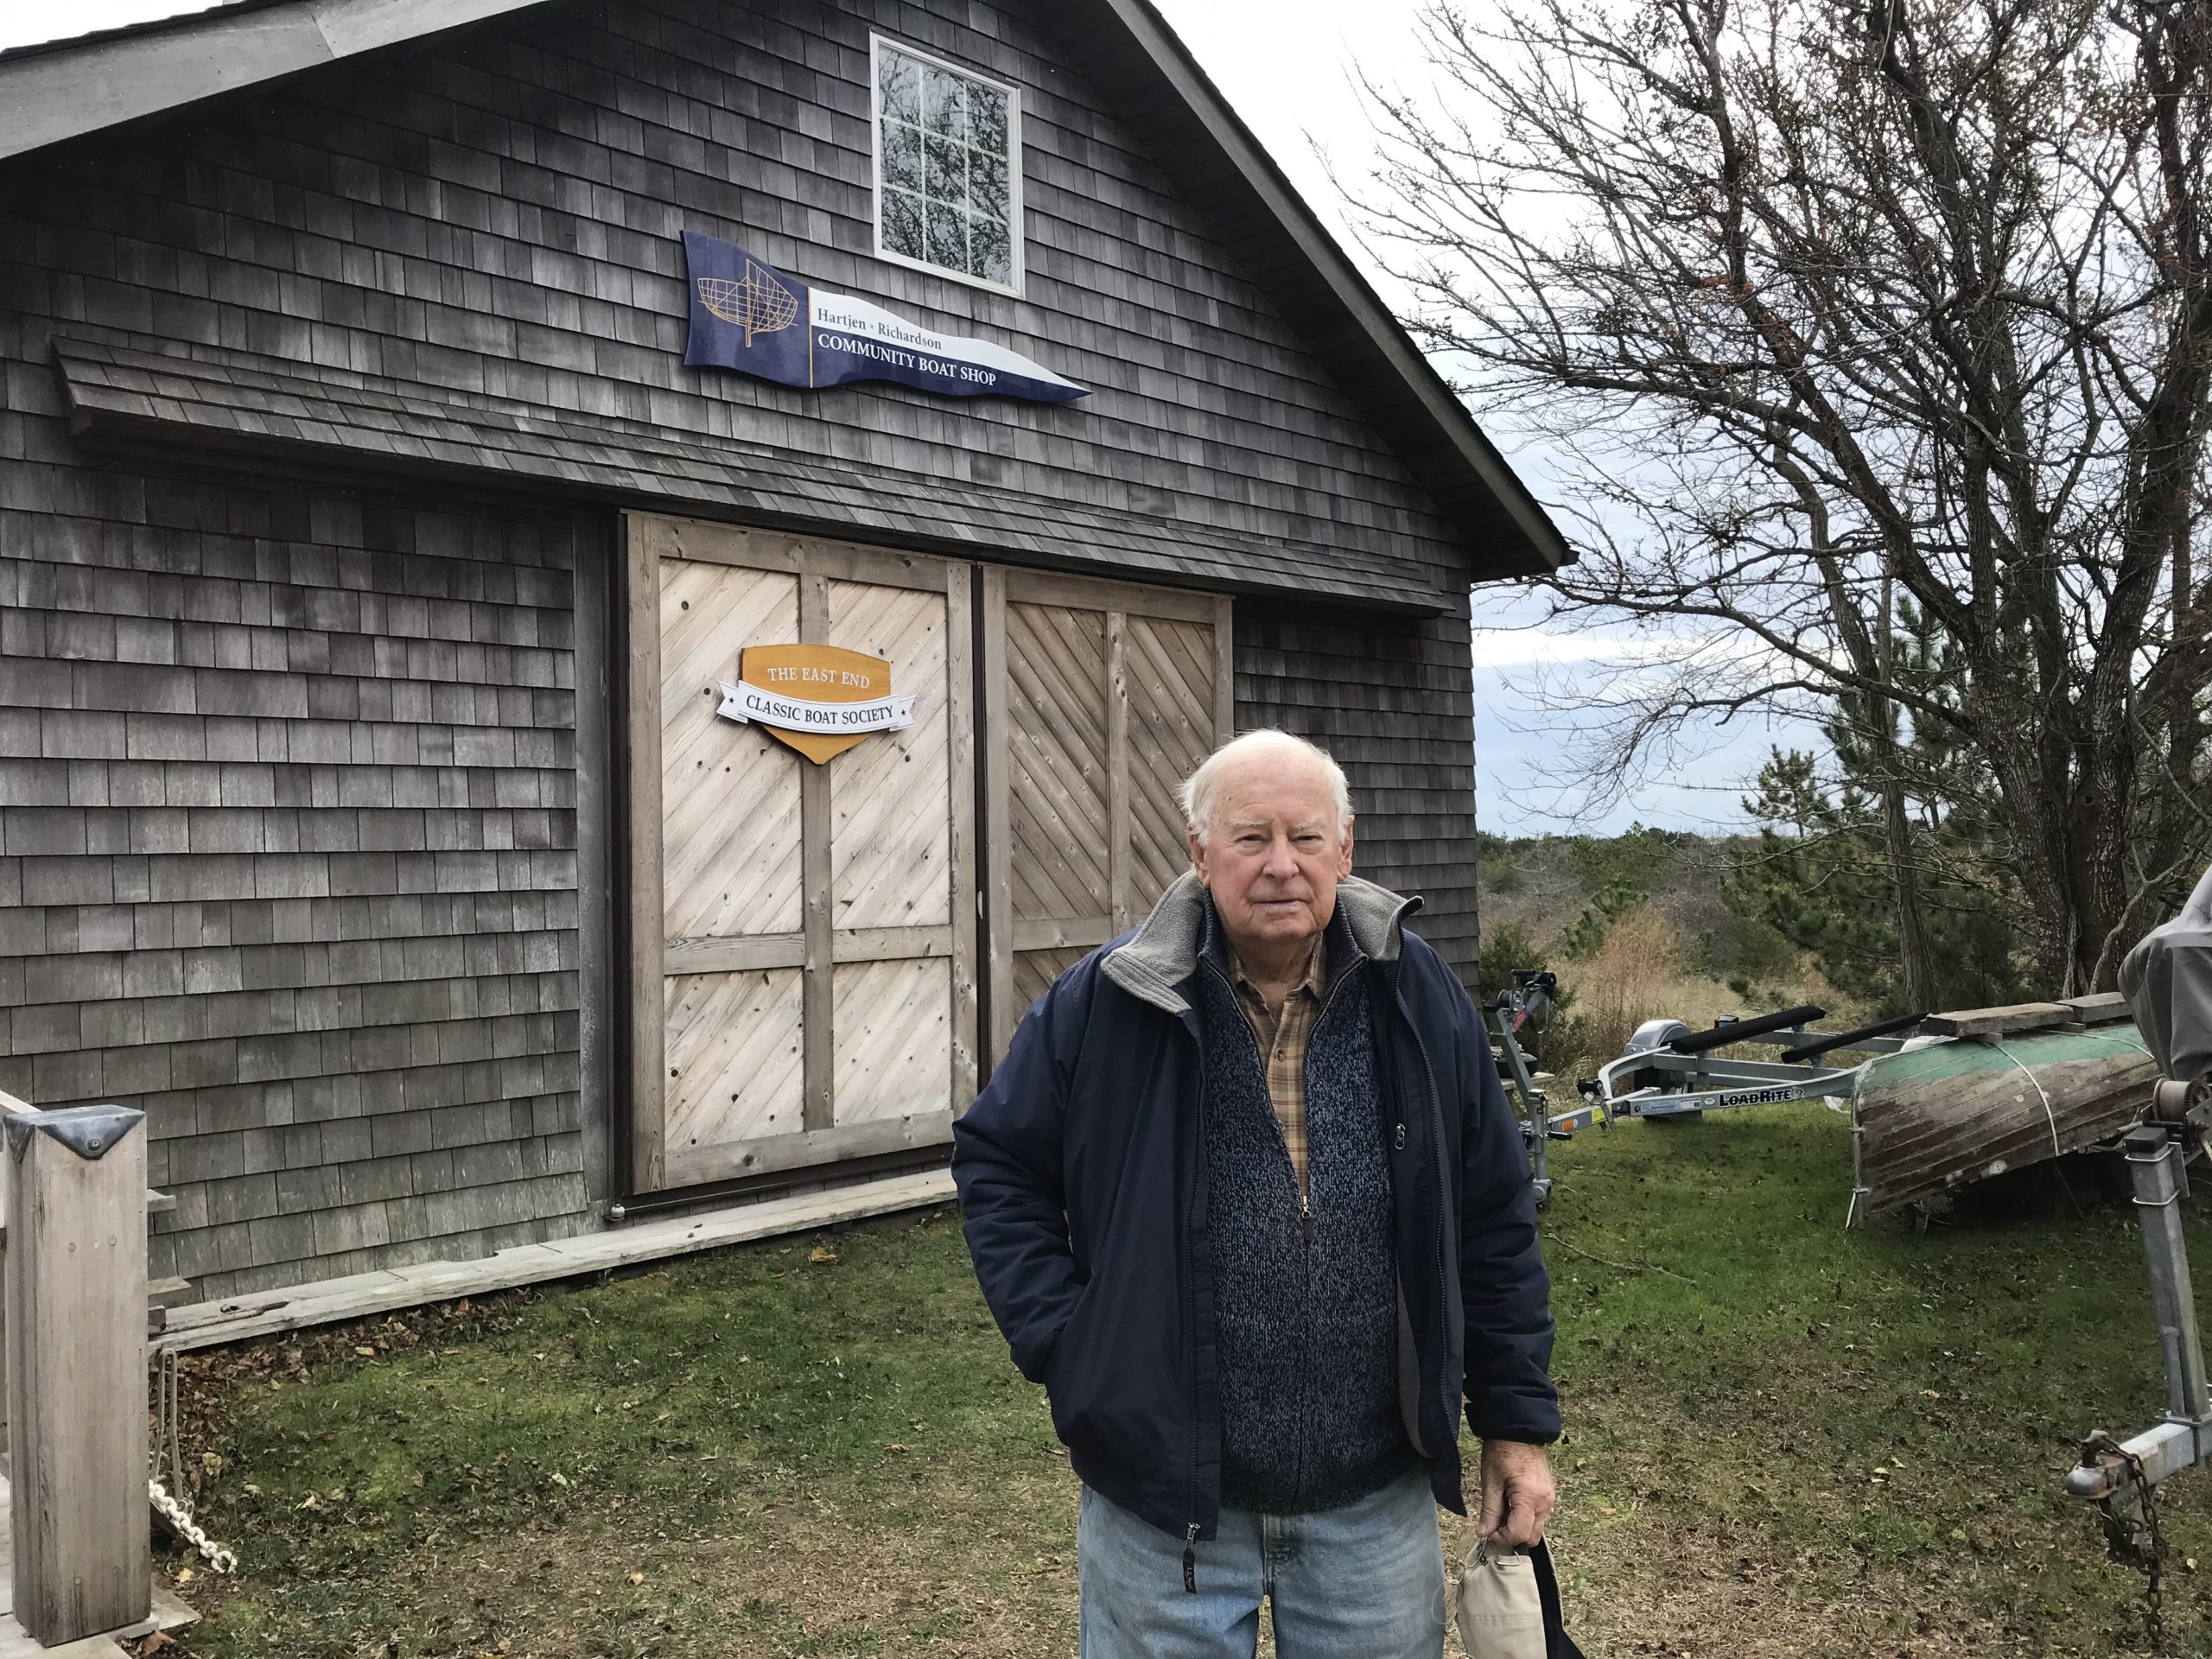 Ray Hartjen of the East End Classic Boat Society is spearheading an effort to bring the whale back to Amagansett. ELIZABETH VESPE